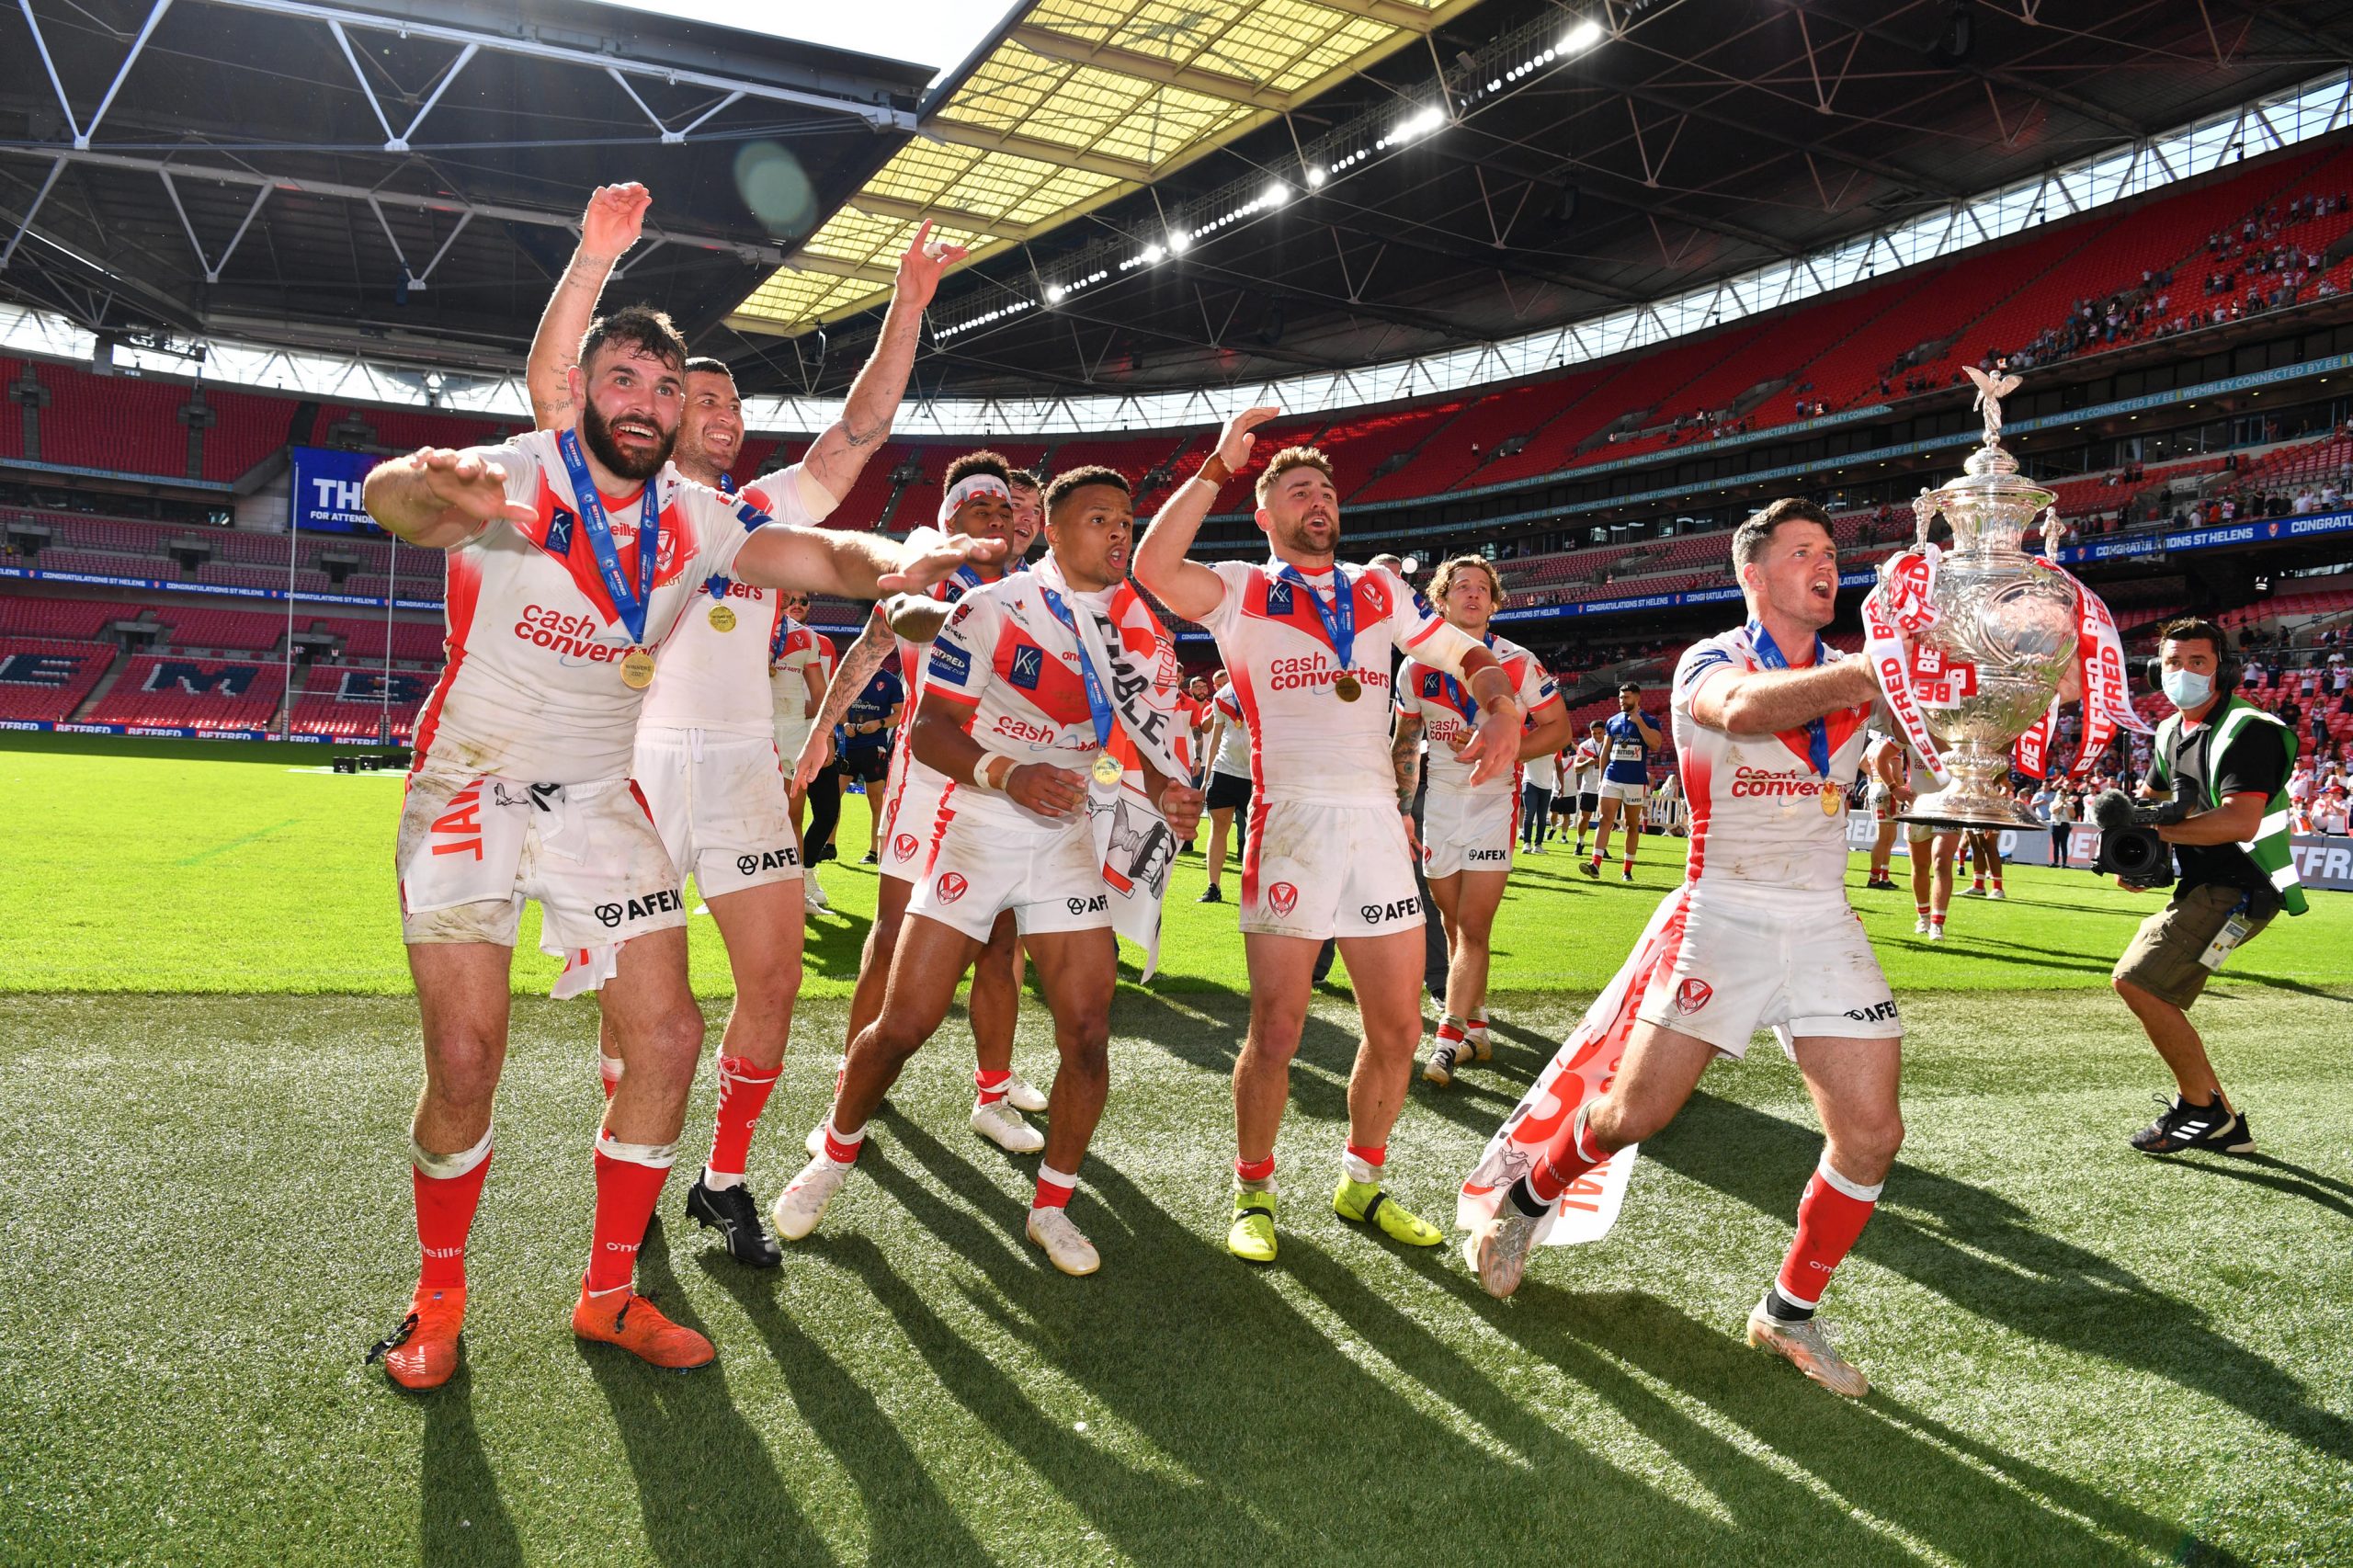 St Helens celebrate their Challenge Cup final win over Castleford Tigers at Wembley in July.